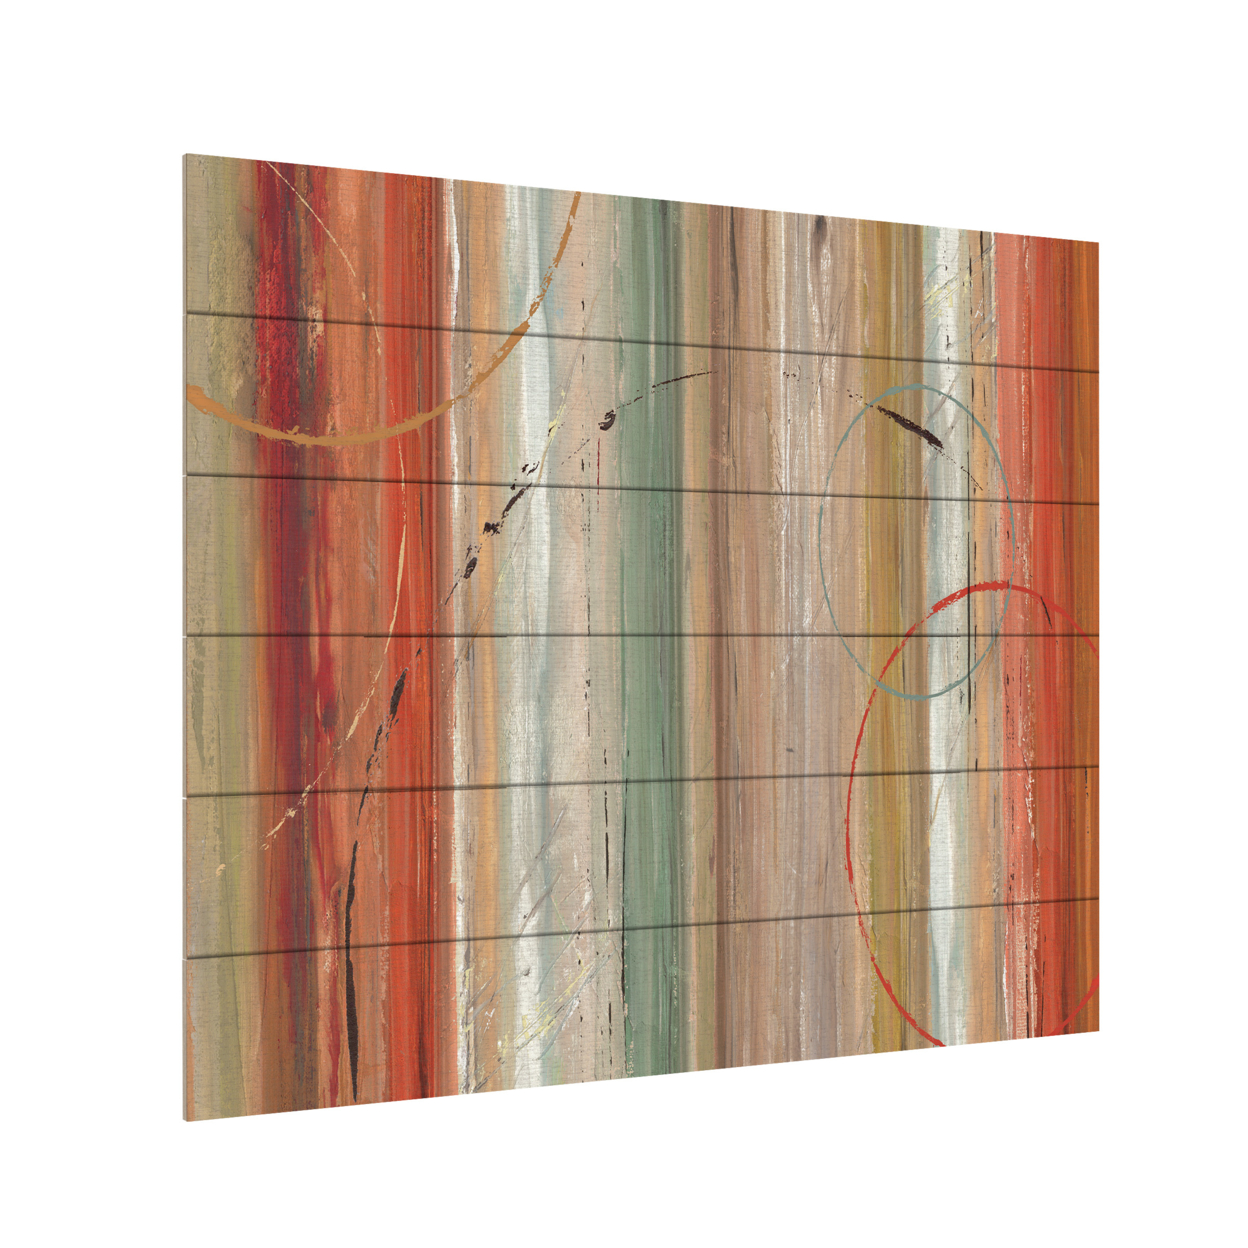 Wooden Slat Art 18 X 22 Inches Titled Spiced II Ready To Hang Home Decor Picture